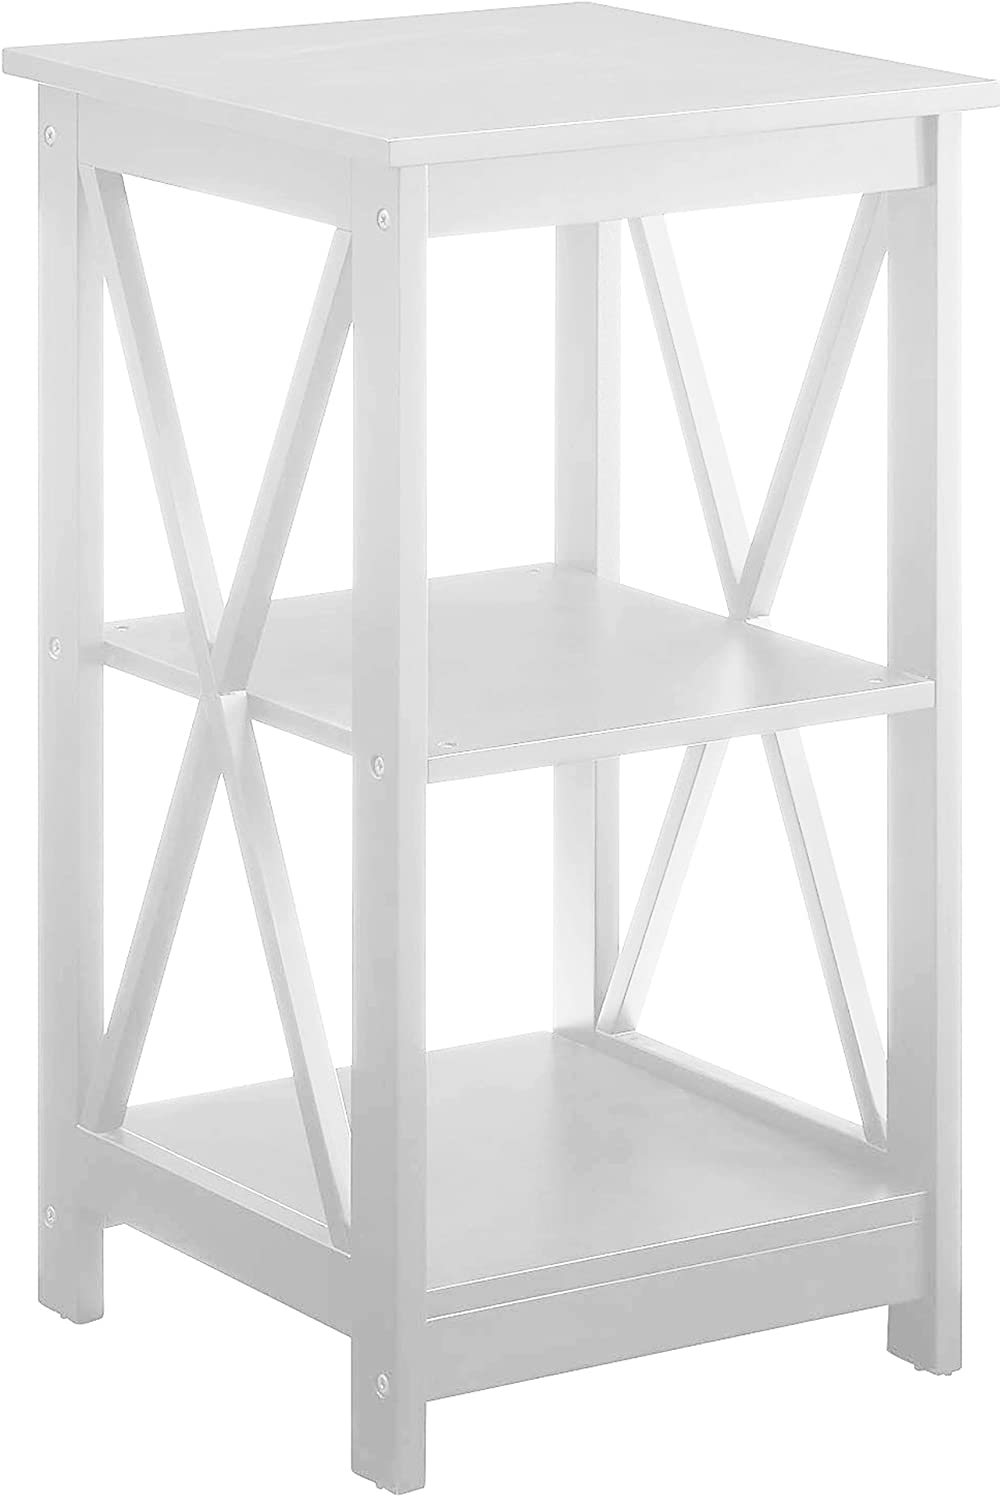 Convenience Concepts Oxford White Rectangular End Table For Bedroom